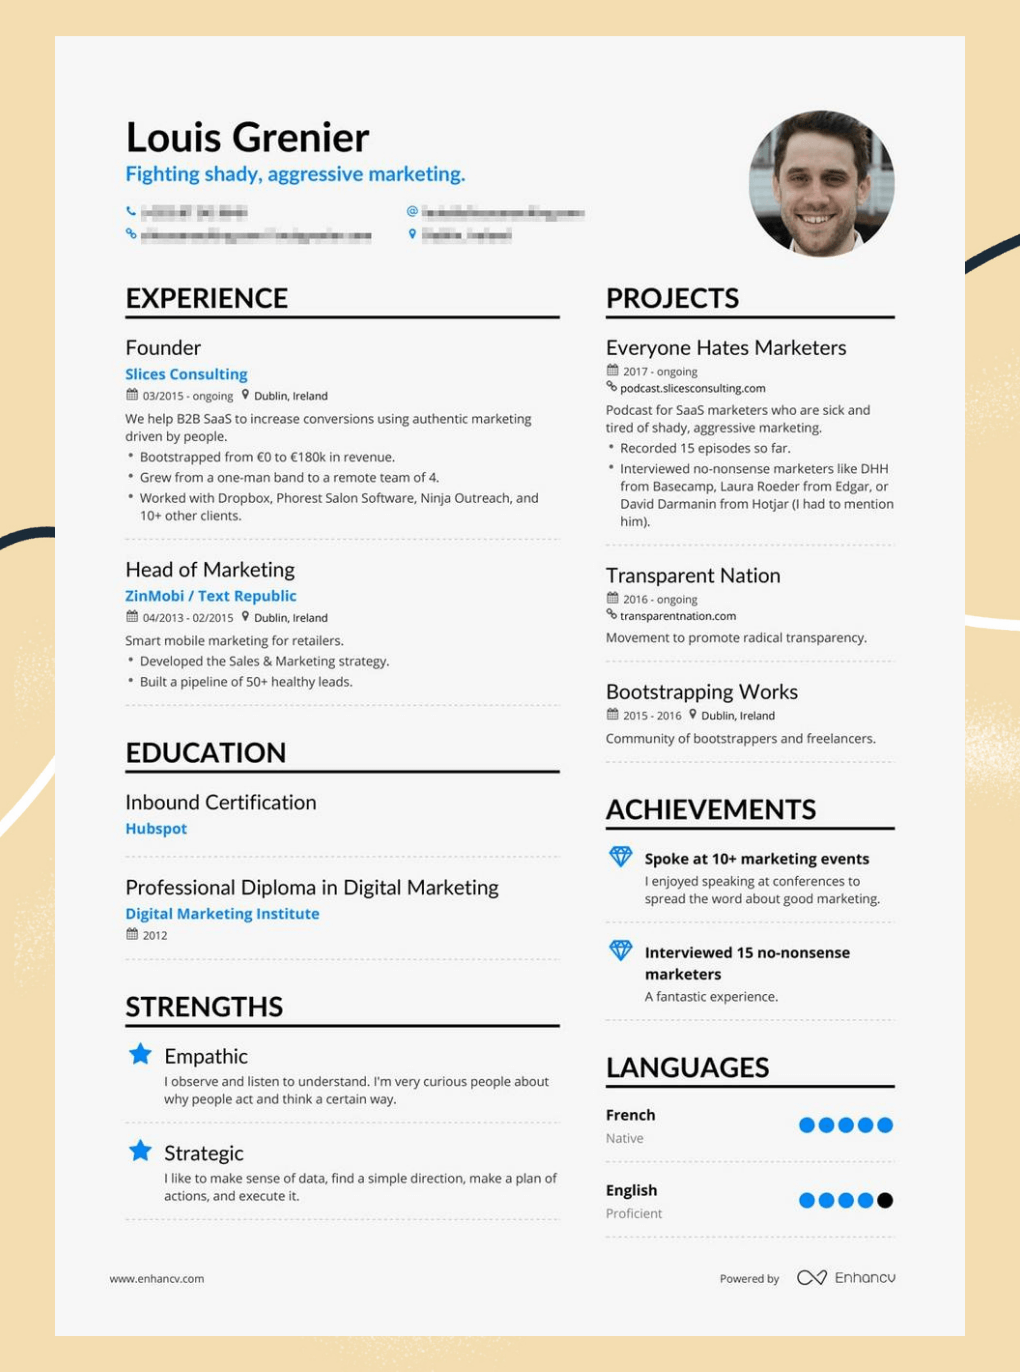 Enhancv Best Resume Layout: 9 Examples and Templates That Recruiters Approve 